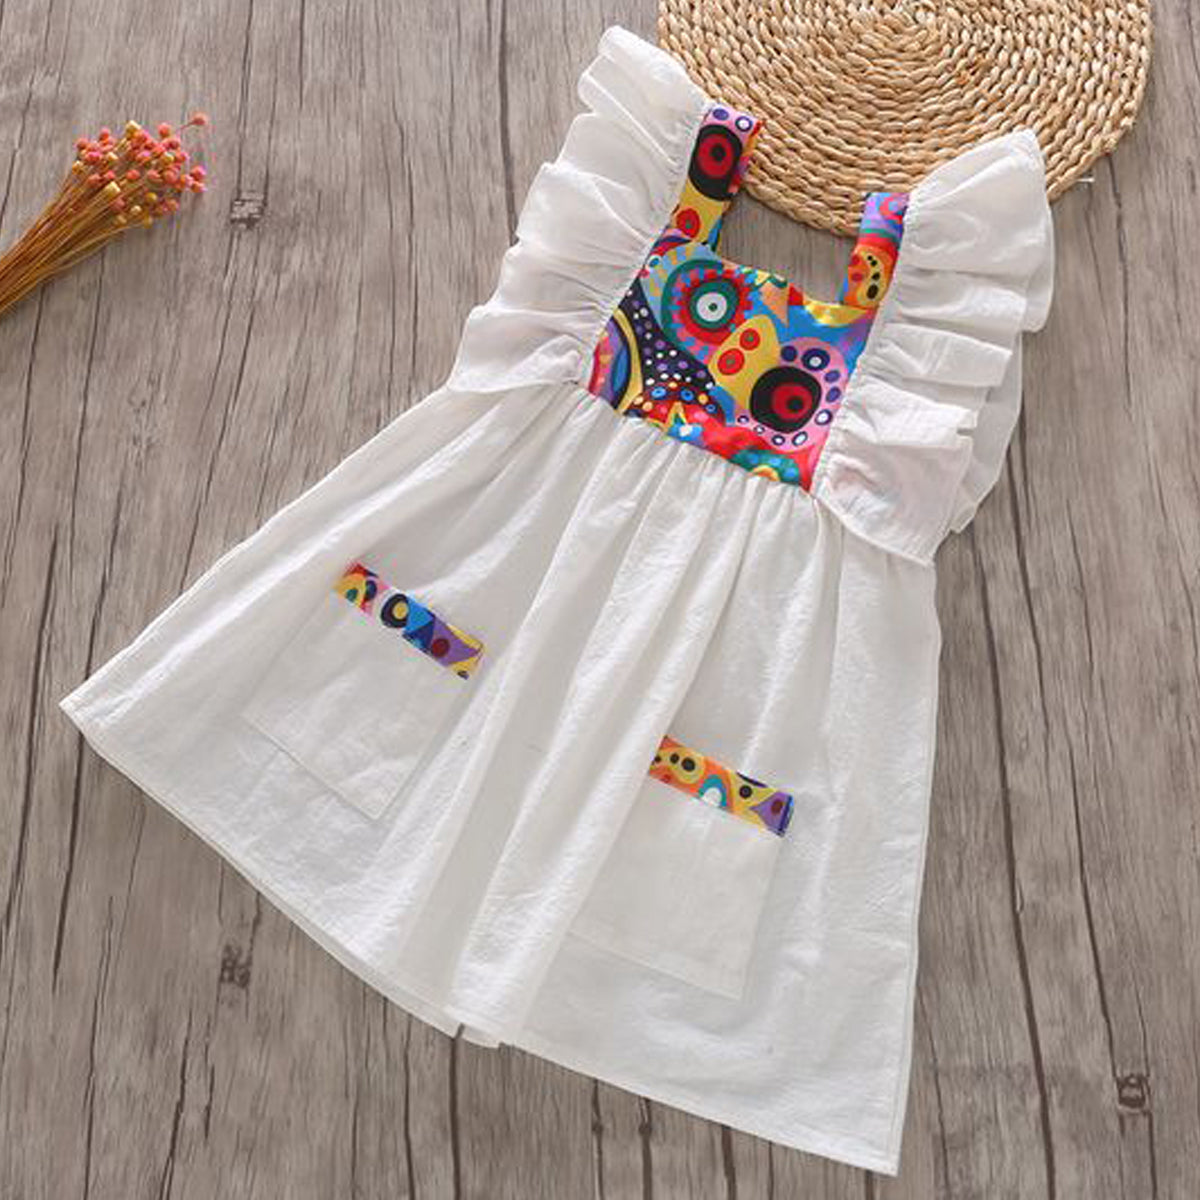 Princess BabyGirl's Yellow Lining_White Pocket Tunic Dresses_Frocks Combo for Kids.